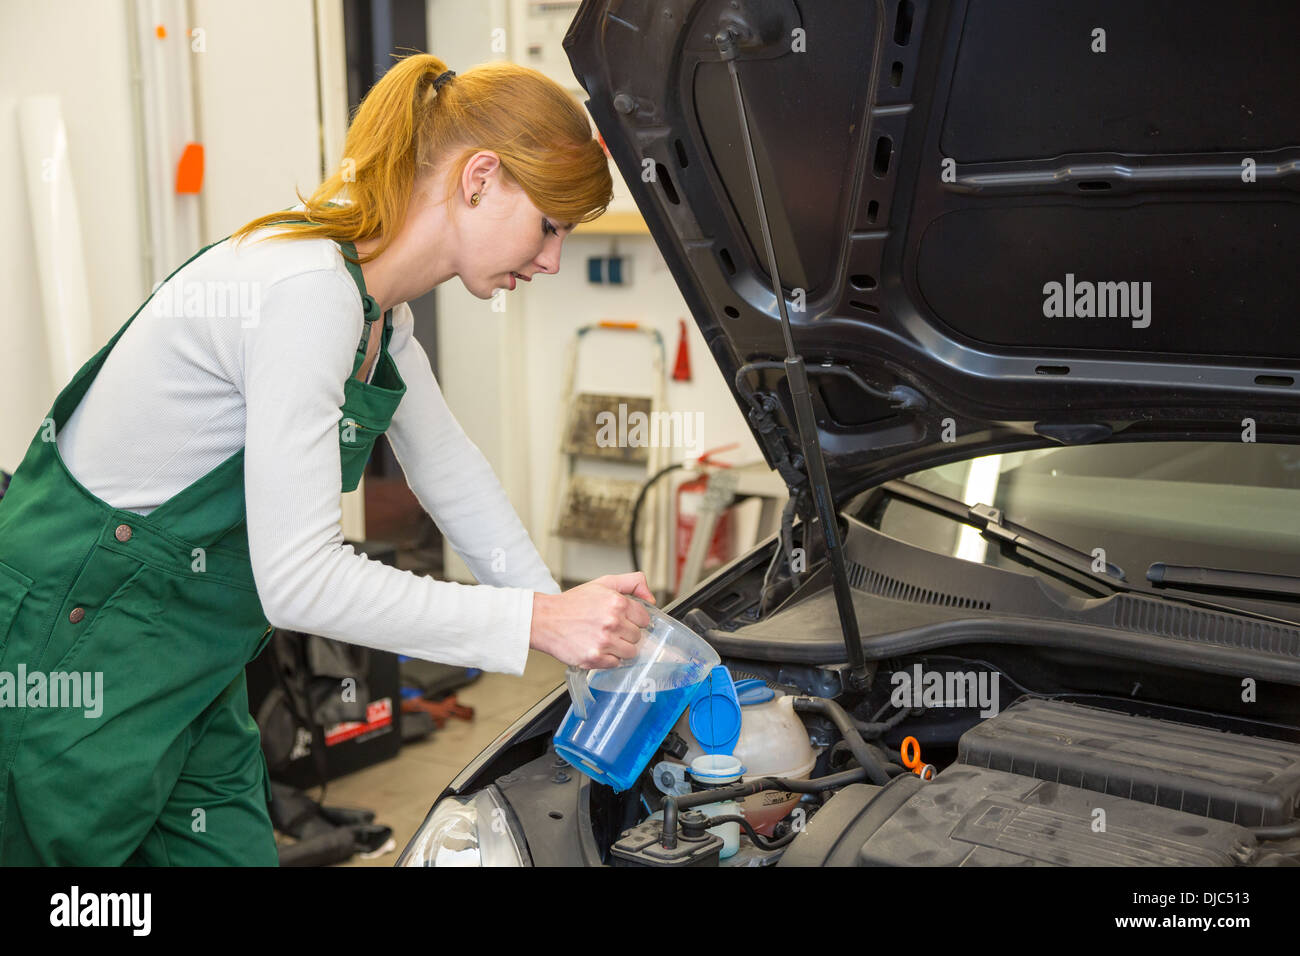 Female mechanic refills coolant or cooling fluid in motor of a car Stock Photo